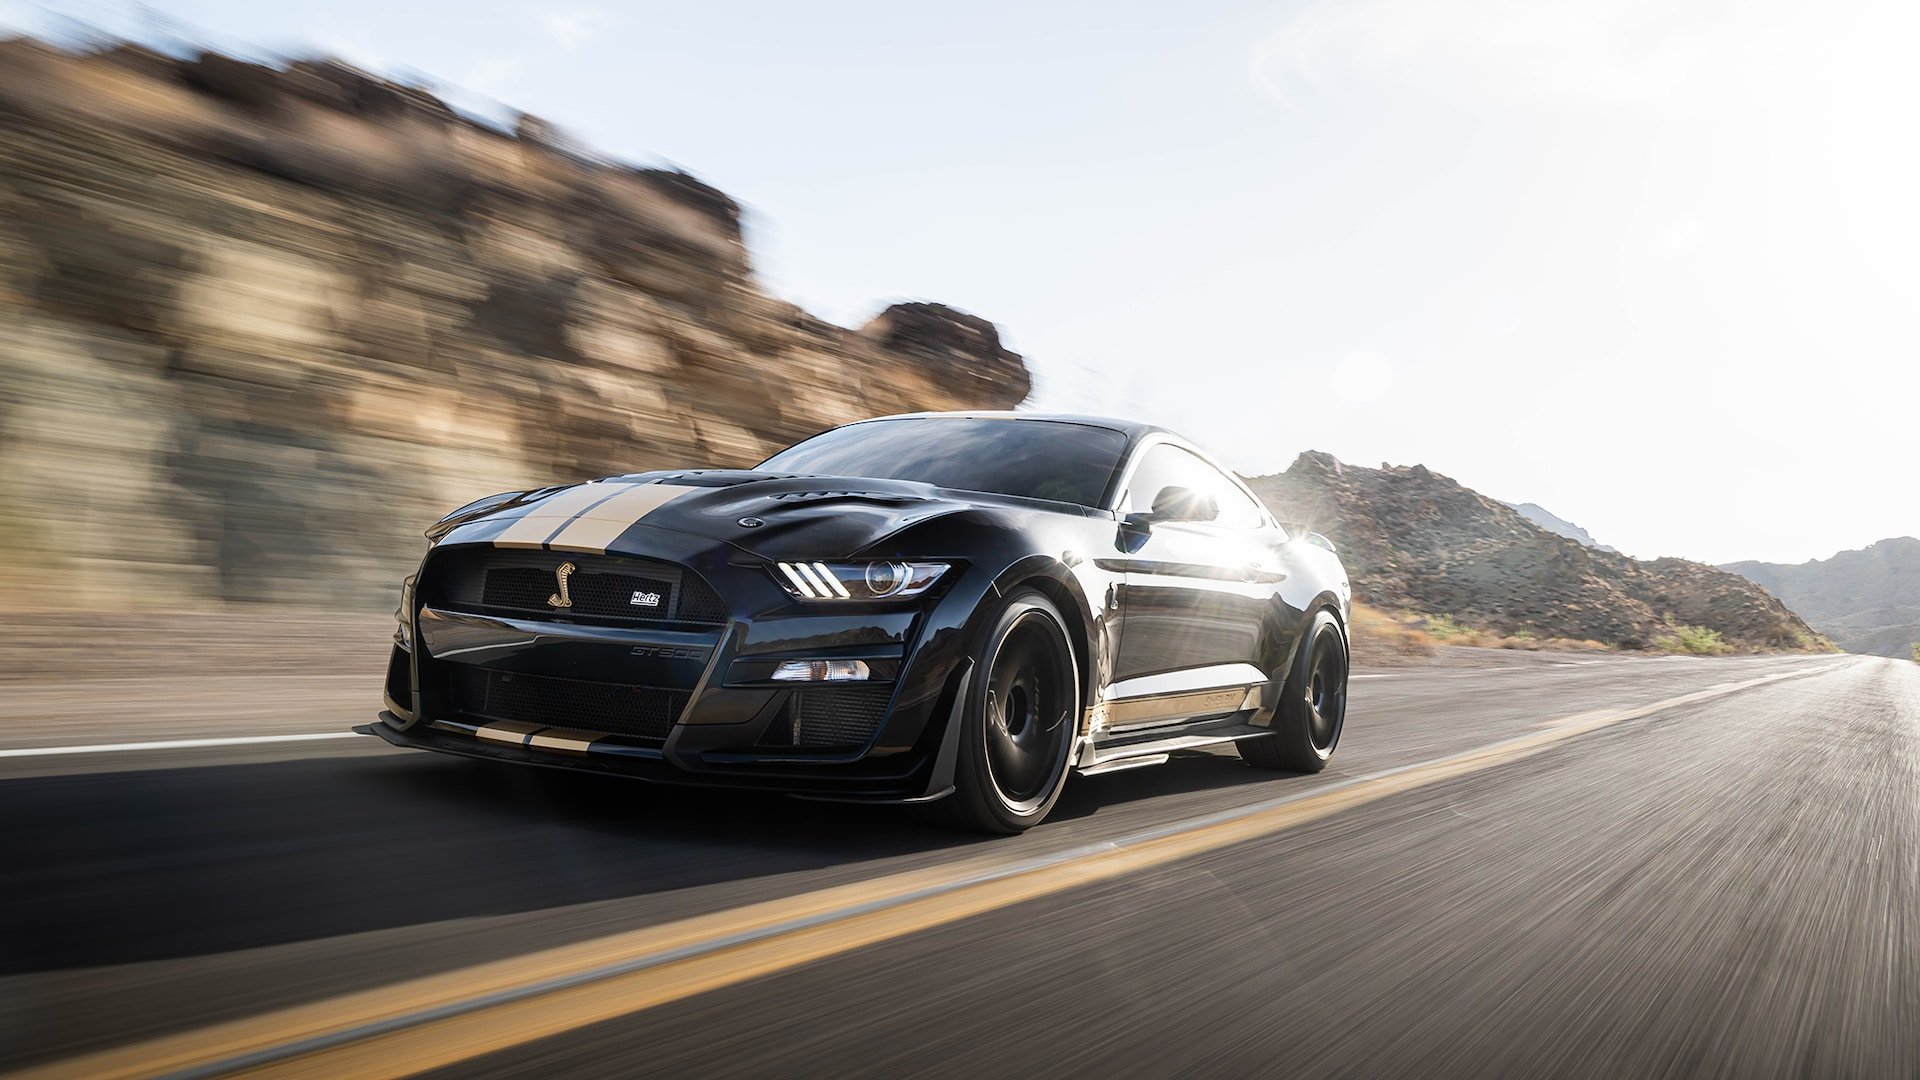 Put The Hertz On Your Vacation With This Rentable 900 HP Shelby Mustang